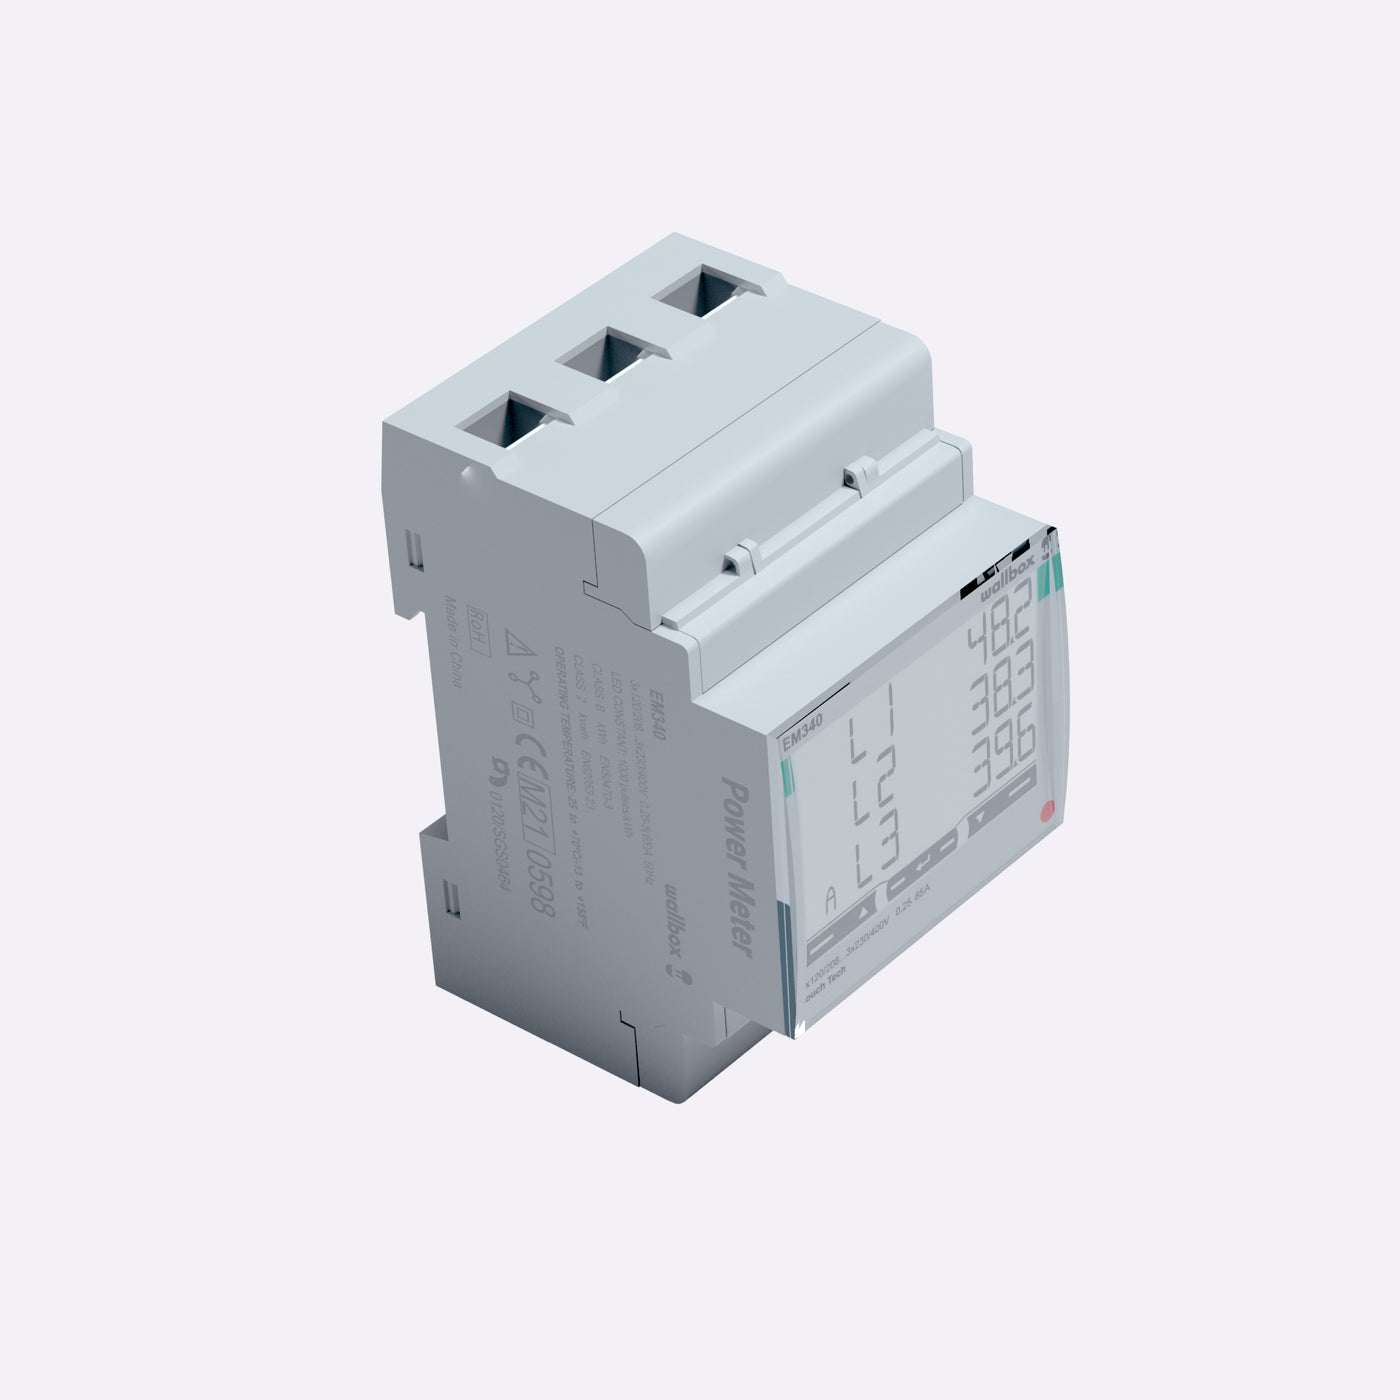 power boost wallbox compteur mid triphase